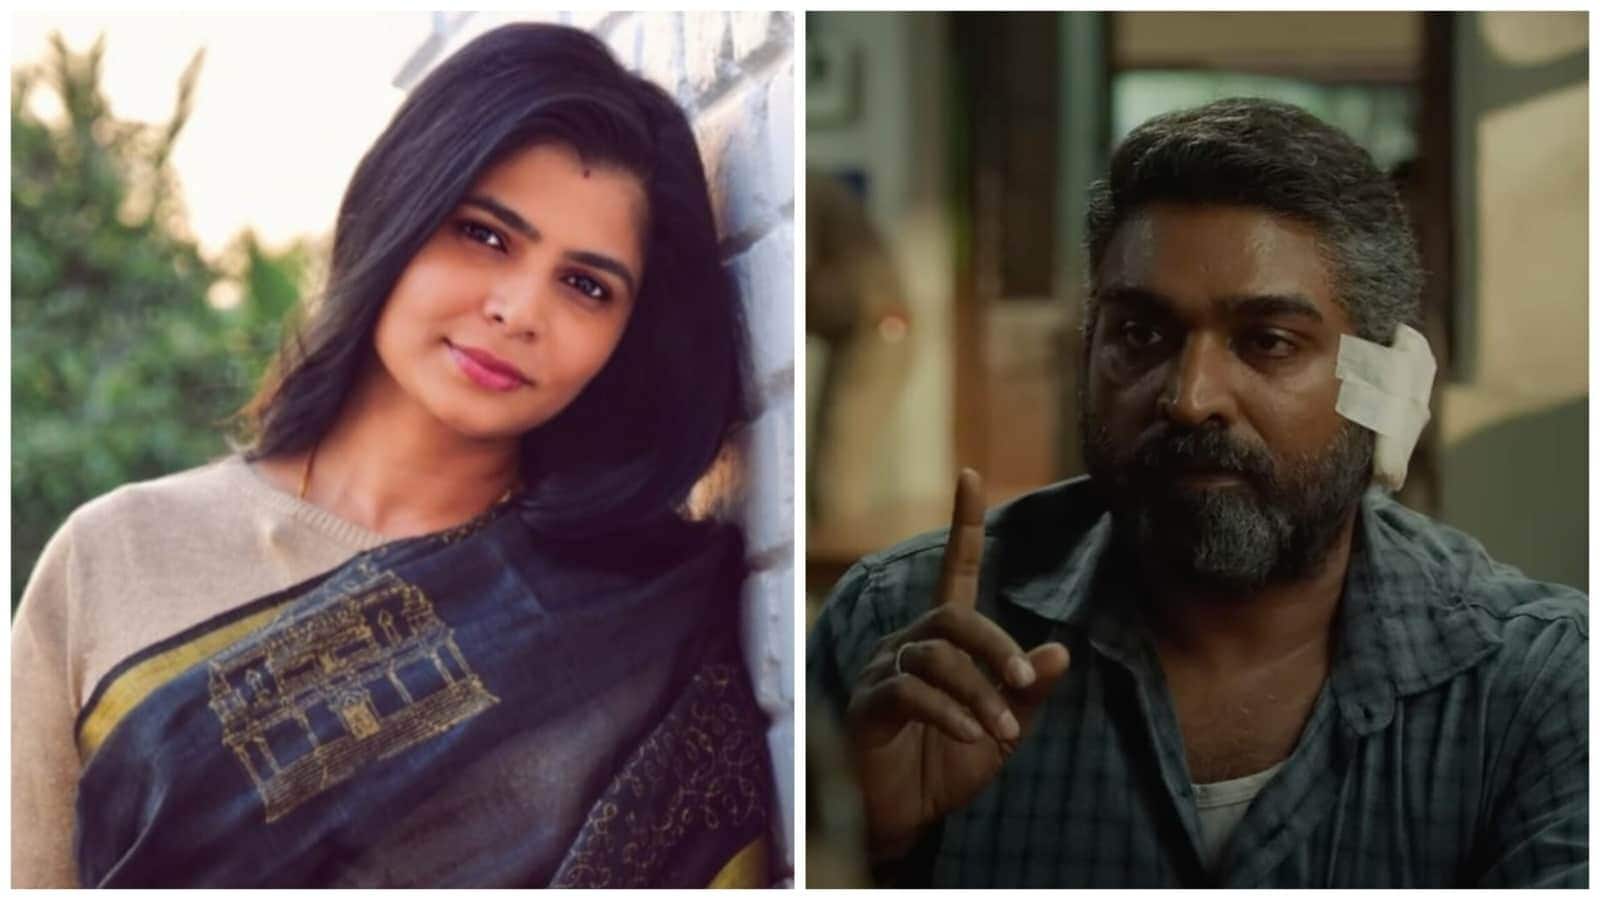 'Maharaja': Chinmayi Sripaada condemns makers for collaborating with MeToo-accused Vairamuthu